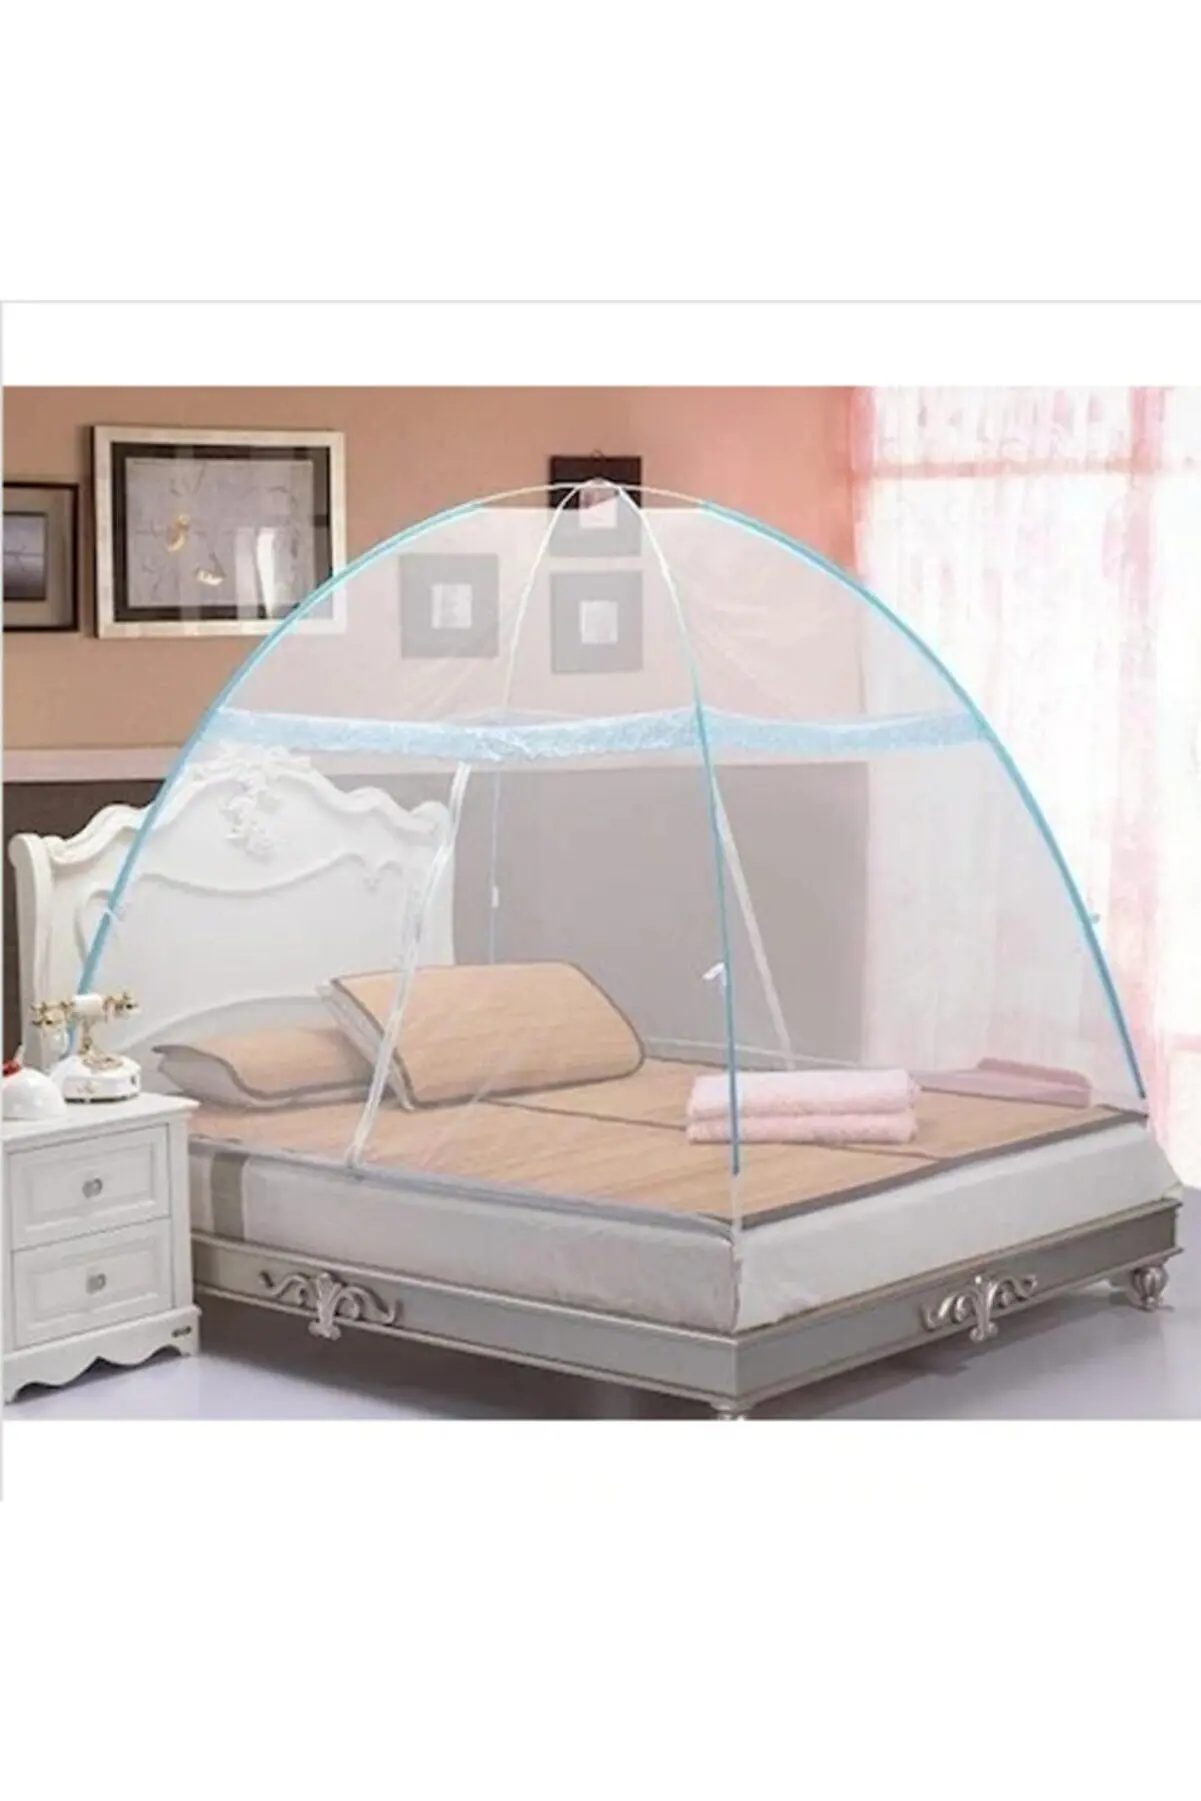 Automatic Installation Double Mosquito Net In Your Bedrooms, Camping, Vacation, Tent; a Buzz-Free, İtchy, Uninterrupted Sleep